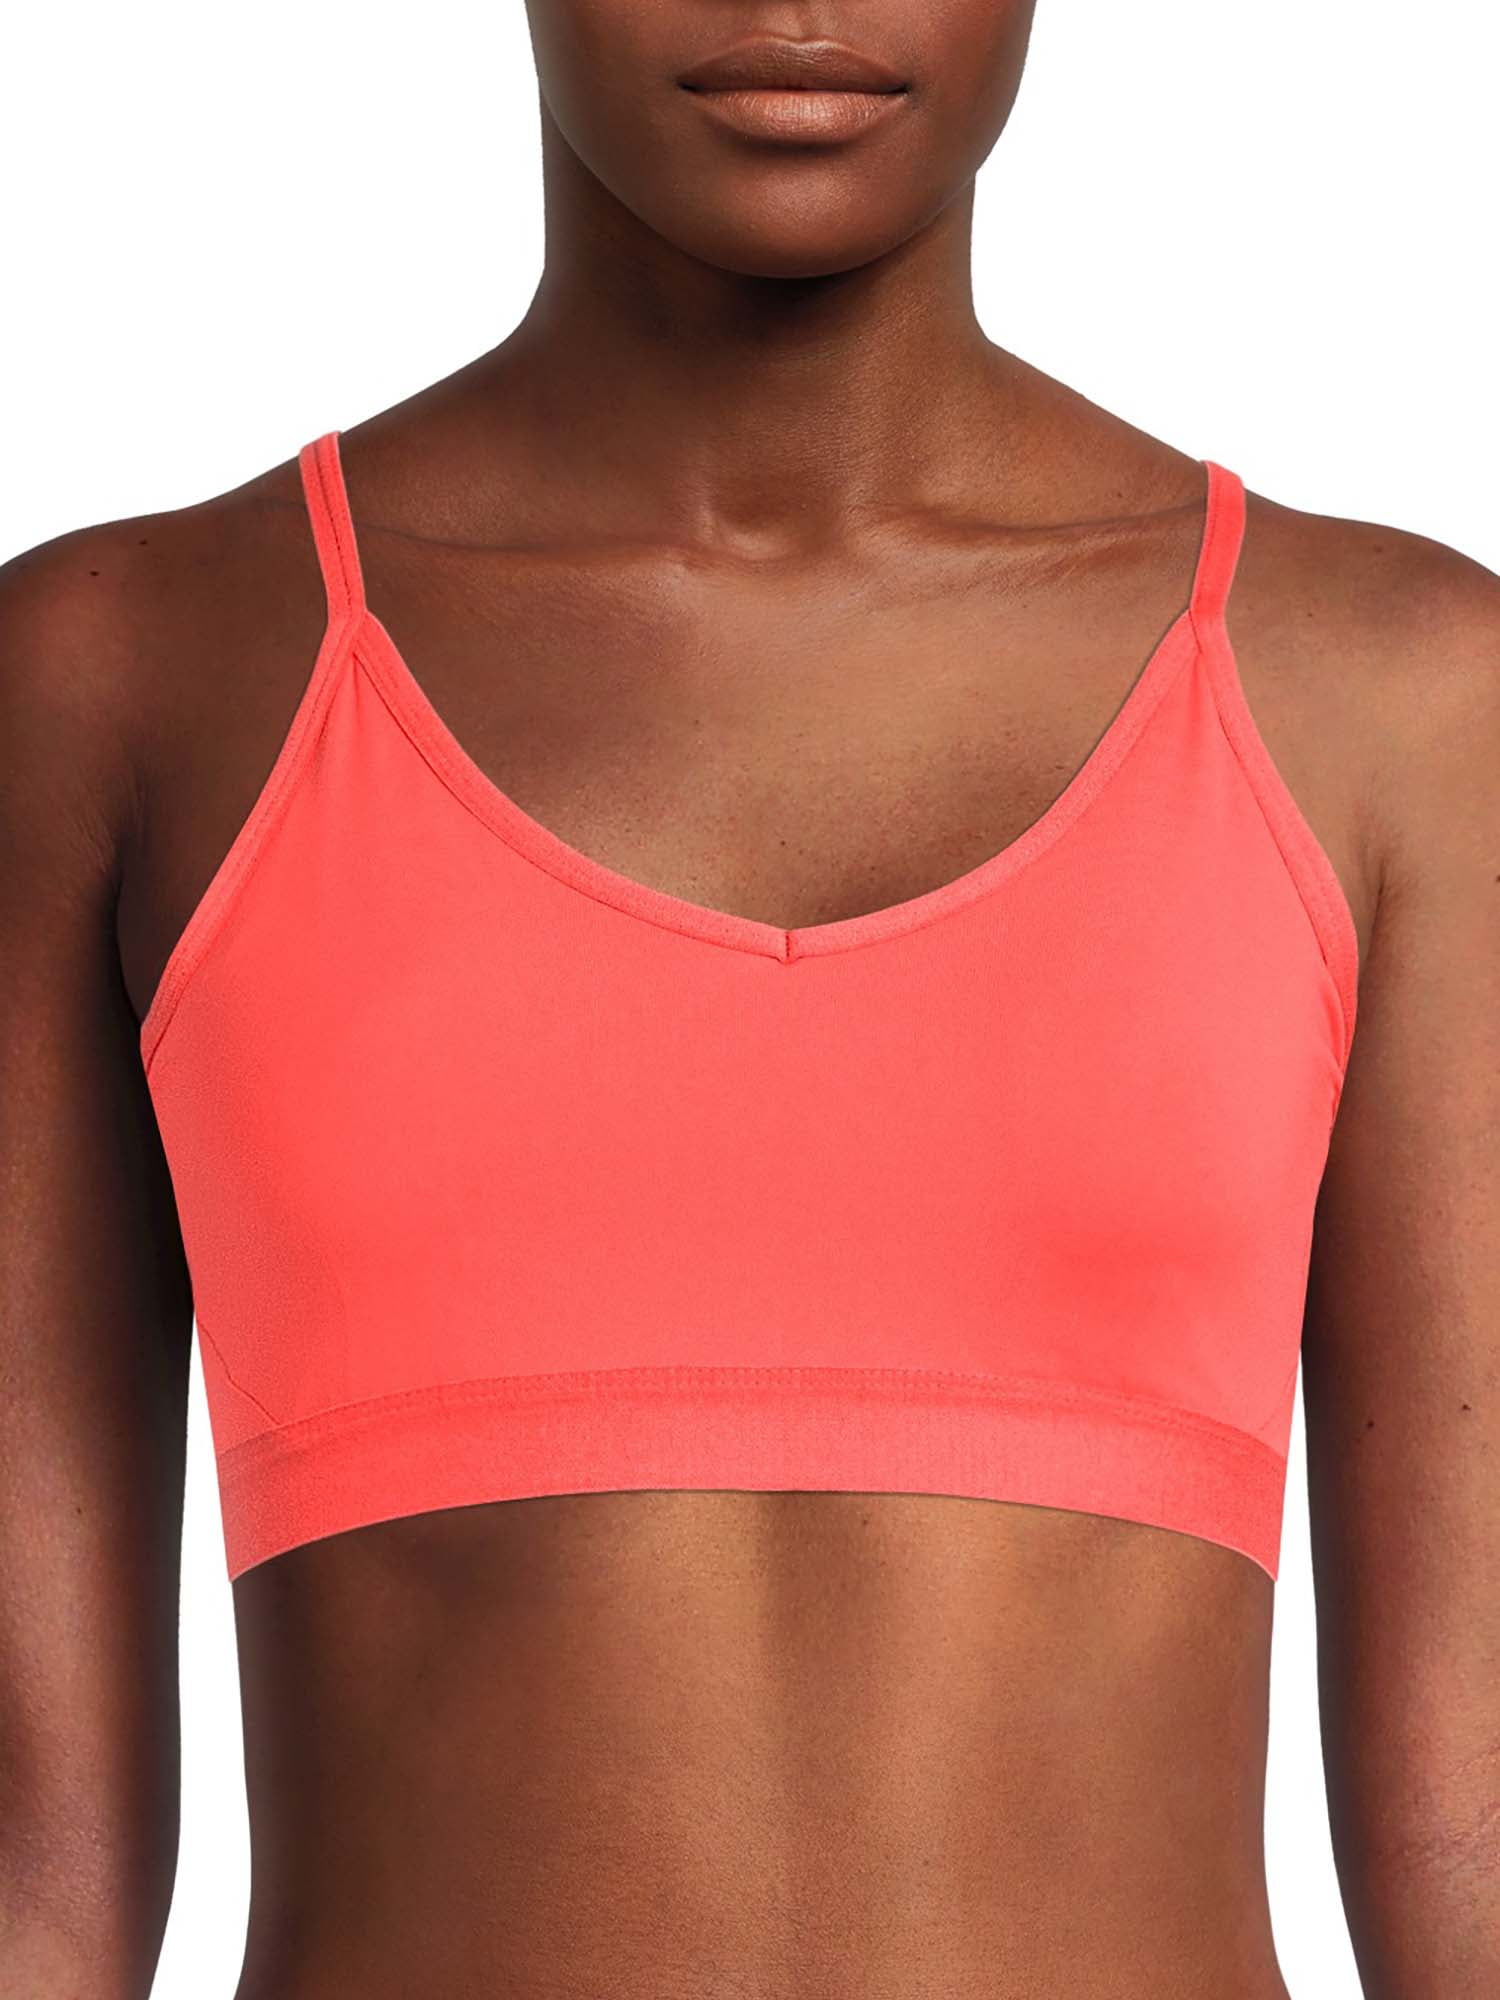 SPYDER Womens Red Removeable Pads RACERBACK SPORTS BRA MINT! Large